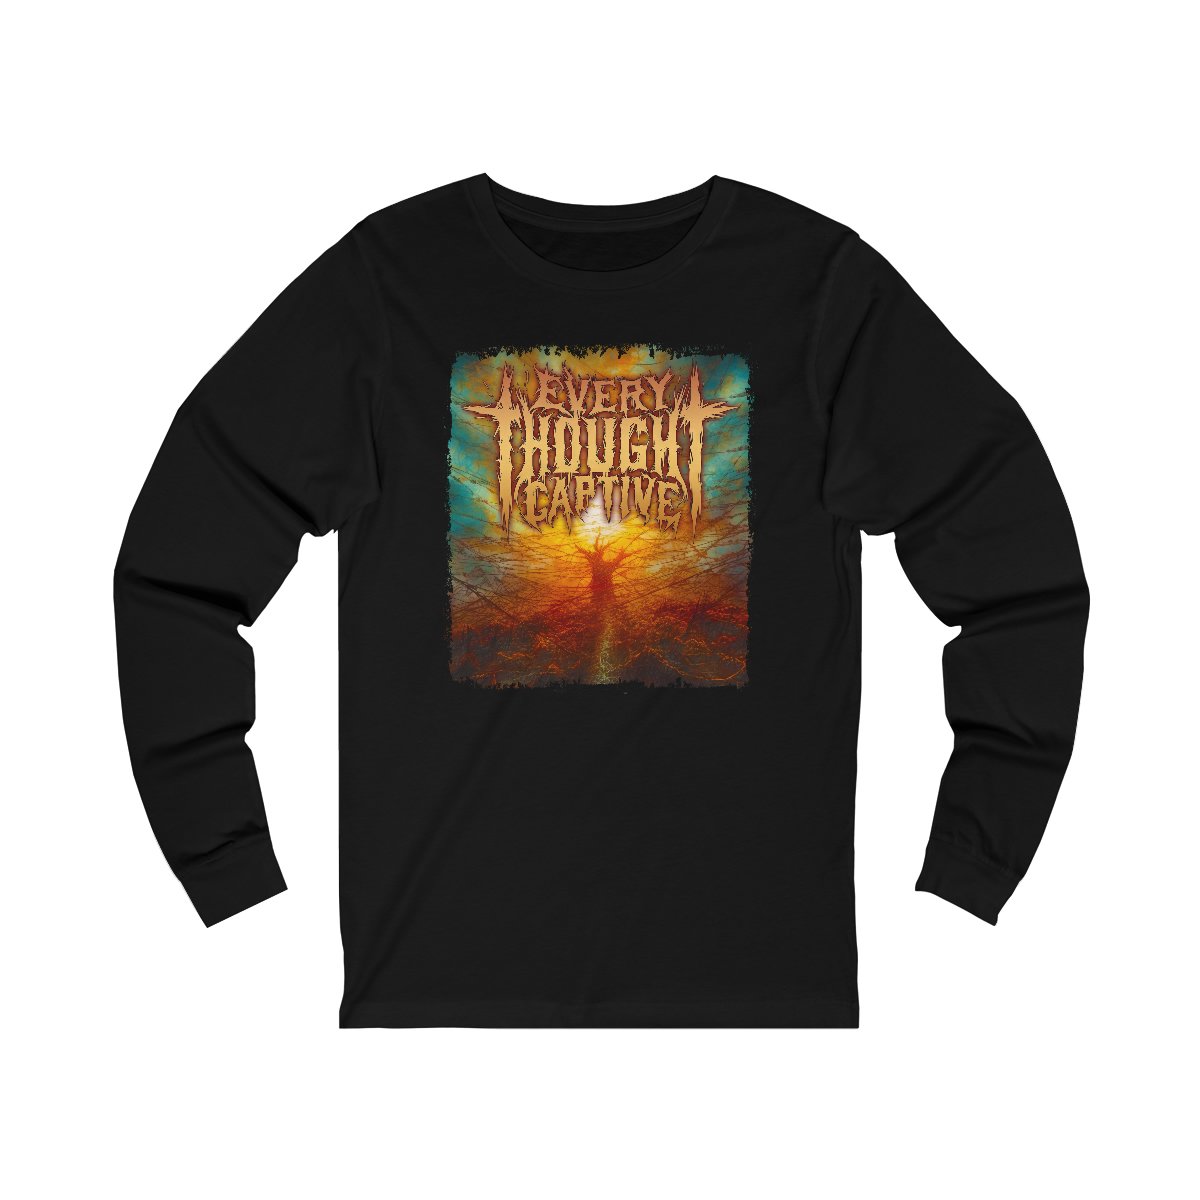 Every Thought Captive Cover Long Sleeve Tshirt